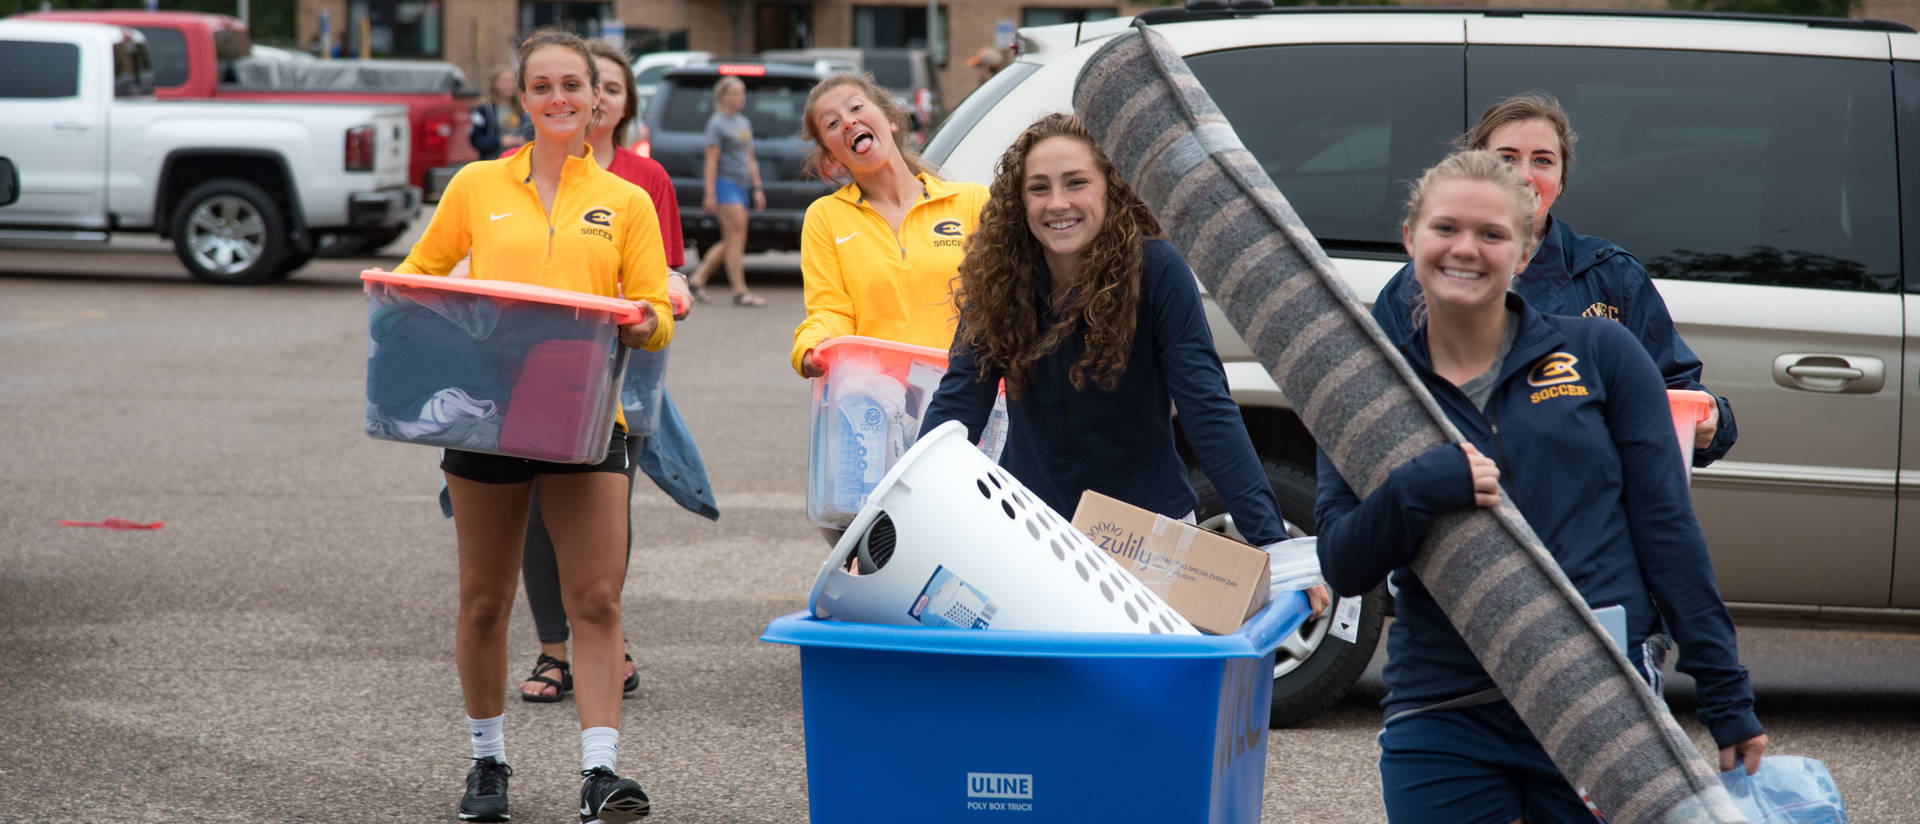 Several UWEC caring items during move in day